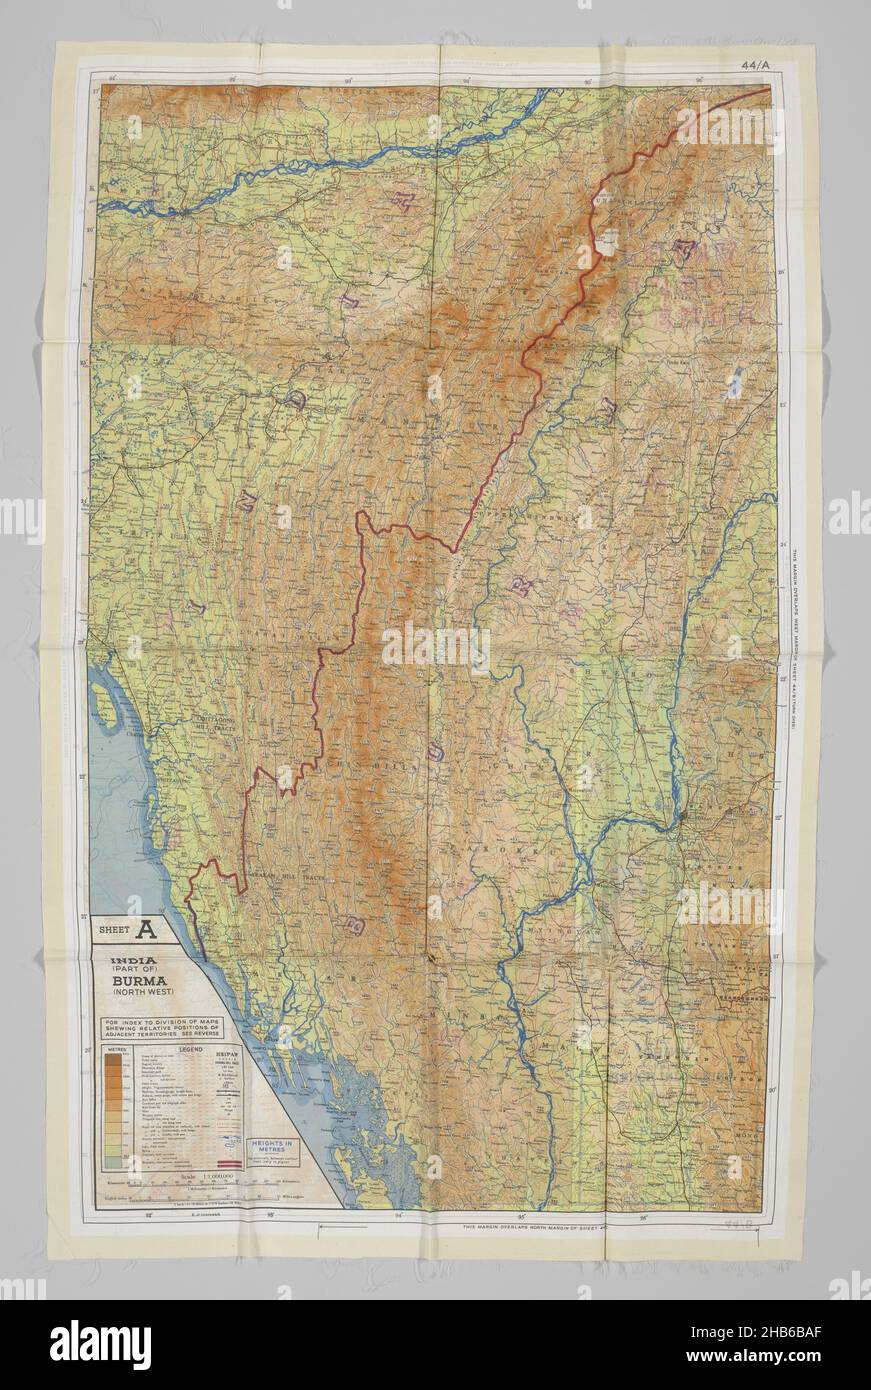 Silk map used as a pilot's scarf, Silk map from the British Air Force (RAF). The fabric is printed on both sides with the maps, 44 A and 44 B of Burma, part of French Indo China, part of Siam, now Thailand, part of India and part of China. The silk maps were intended for pilots and crew members of the RAF. The material made them light, resistant to water and the humid climate in general. This housecoat was made in Indonesia by Mrs Terwen de Loos from silk maps which were popular for making clothes after the liberation due to the textile shortage. This additional donation gives a good idea of Stock Photo